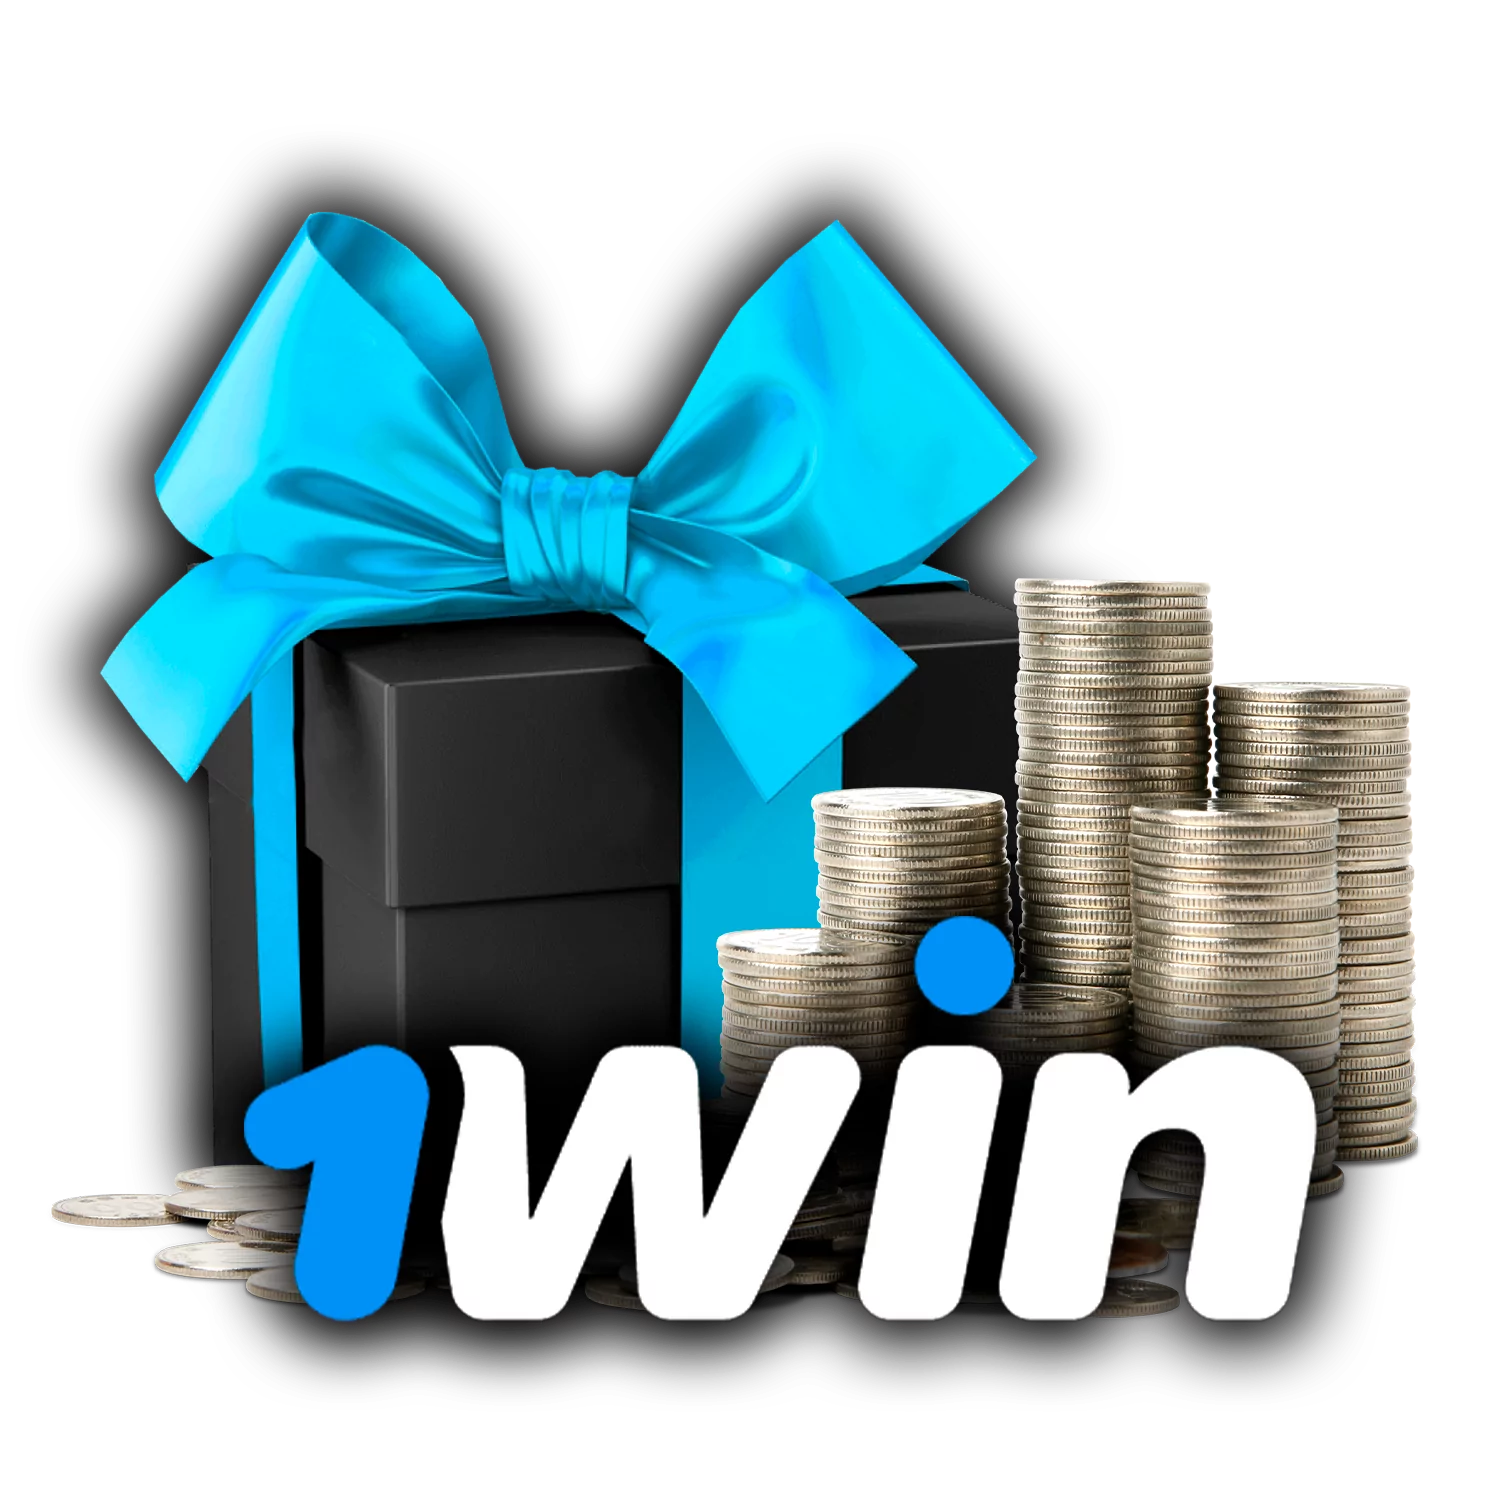 In this article, you learn how to get a bonus on betting and playing casino games from 1win.